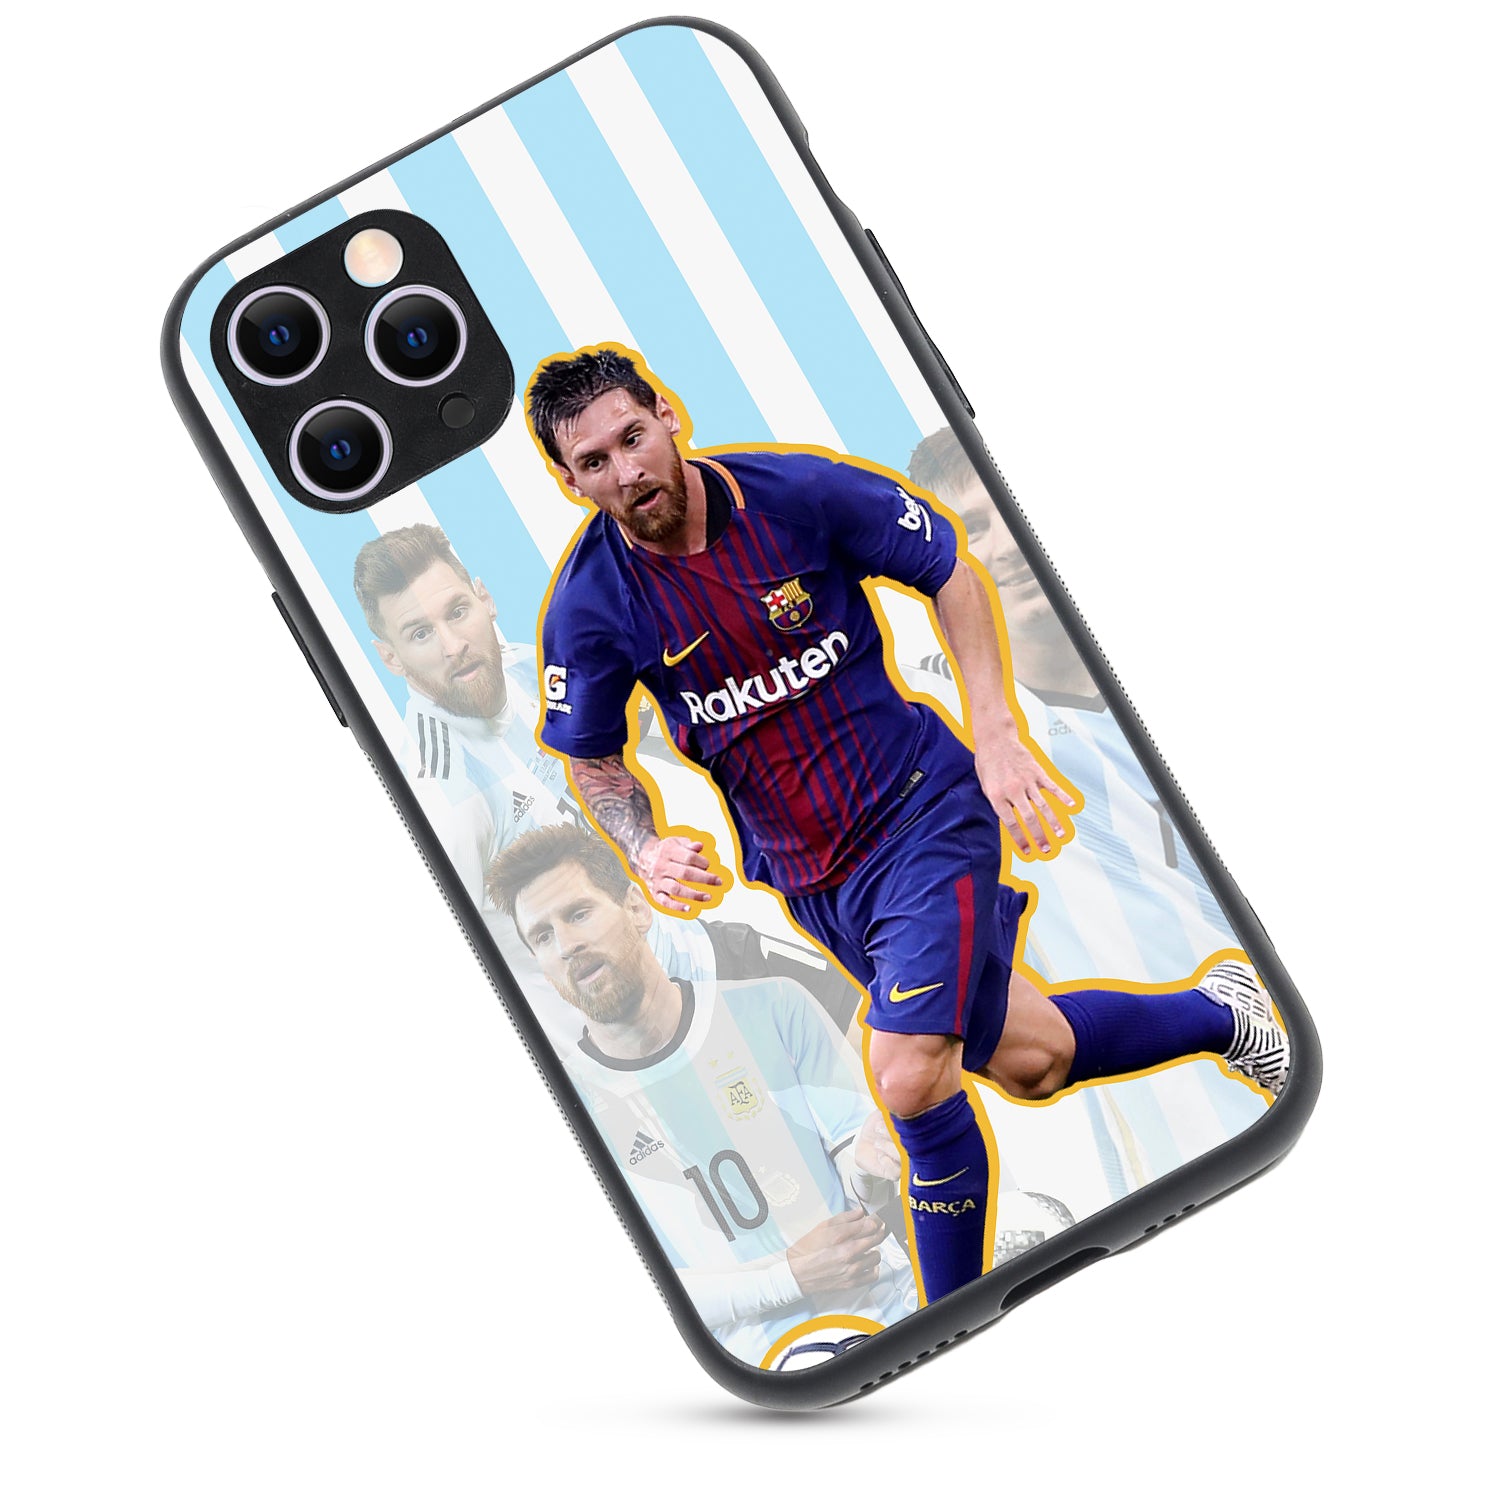 Messi Collage Sports iPhone 11 Pro Case